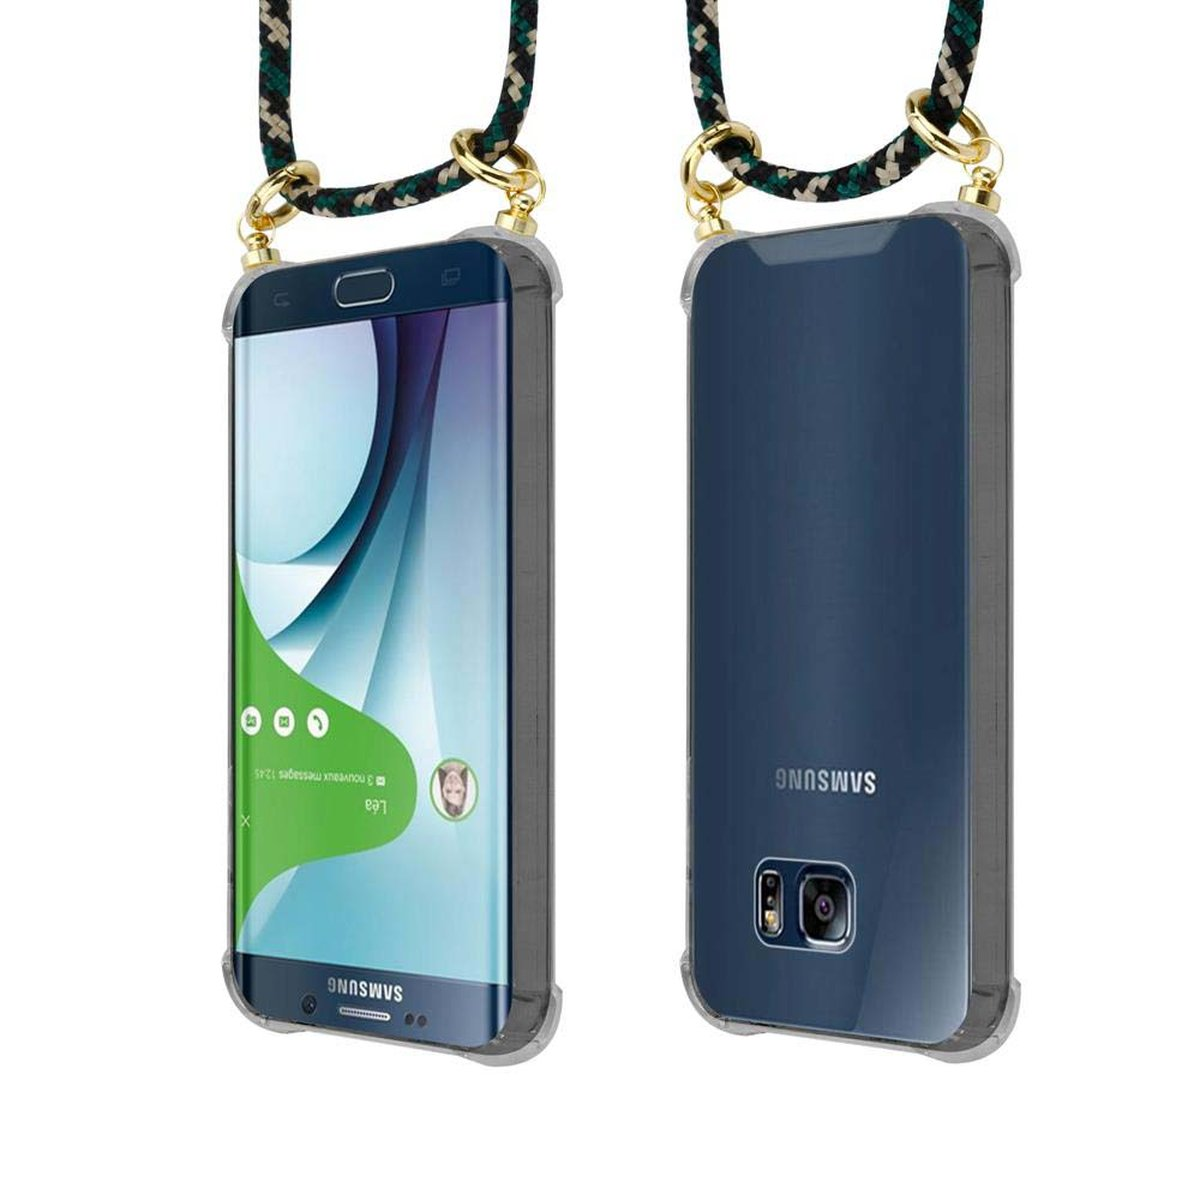 CADORABO Handy Kette mit abnehmbarer Galaxy S6 Band EDGE, und CAMOUFLAGE Backcover, Samsung, Hülle, Ringen, Gold Kordel